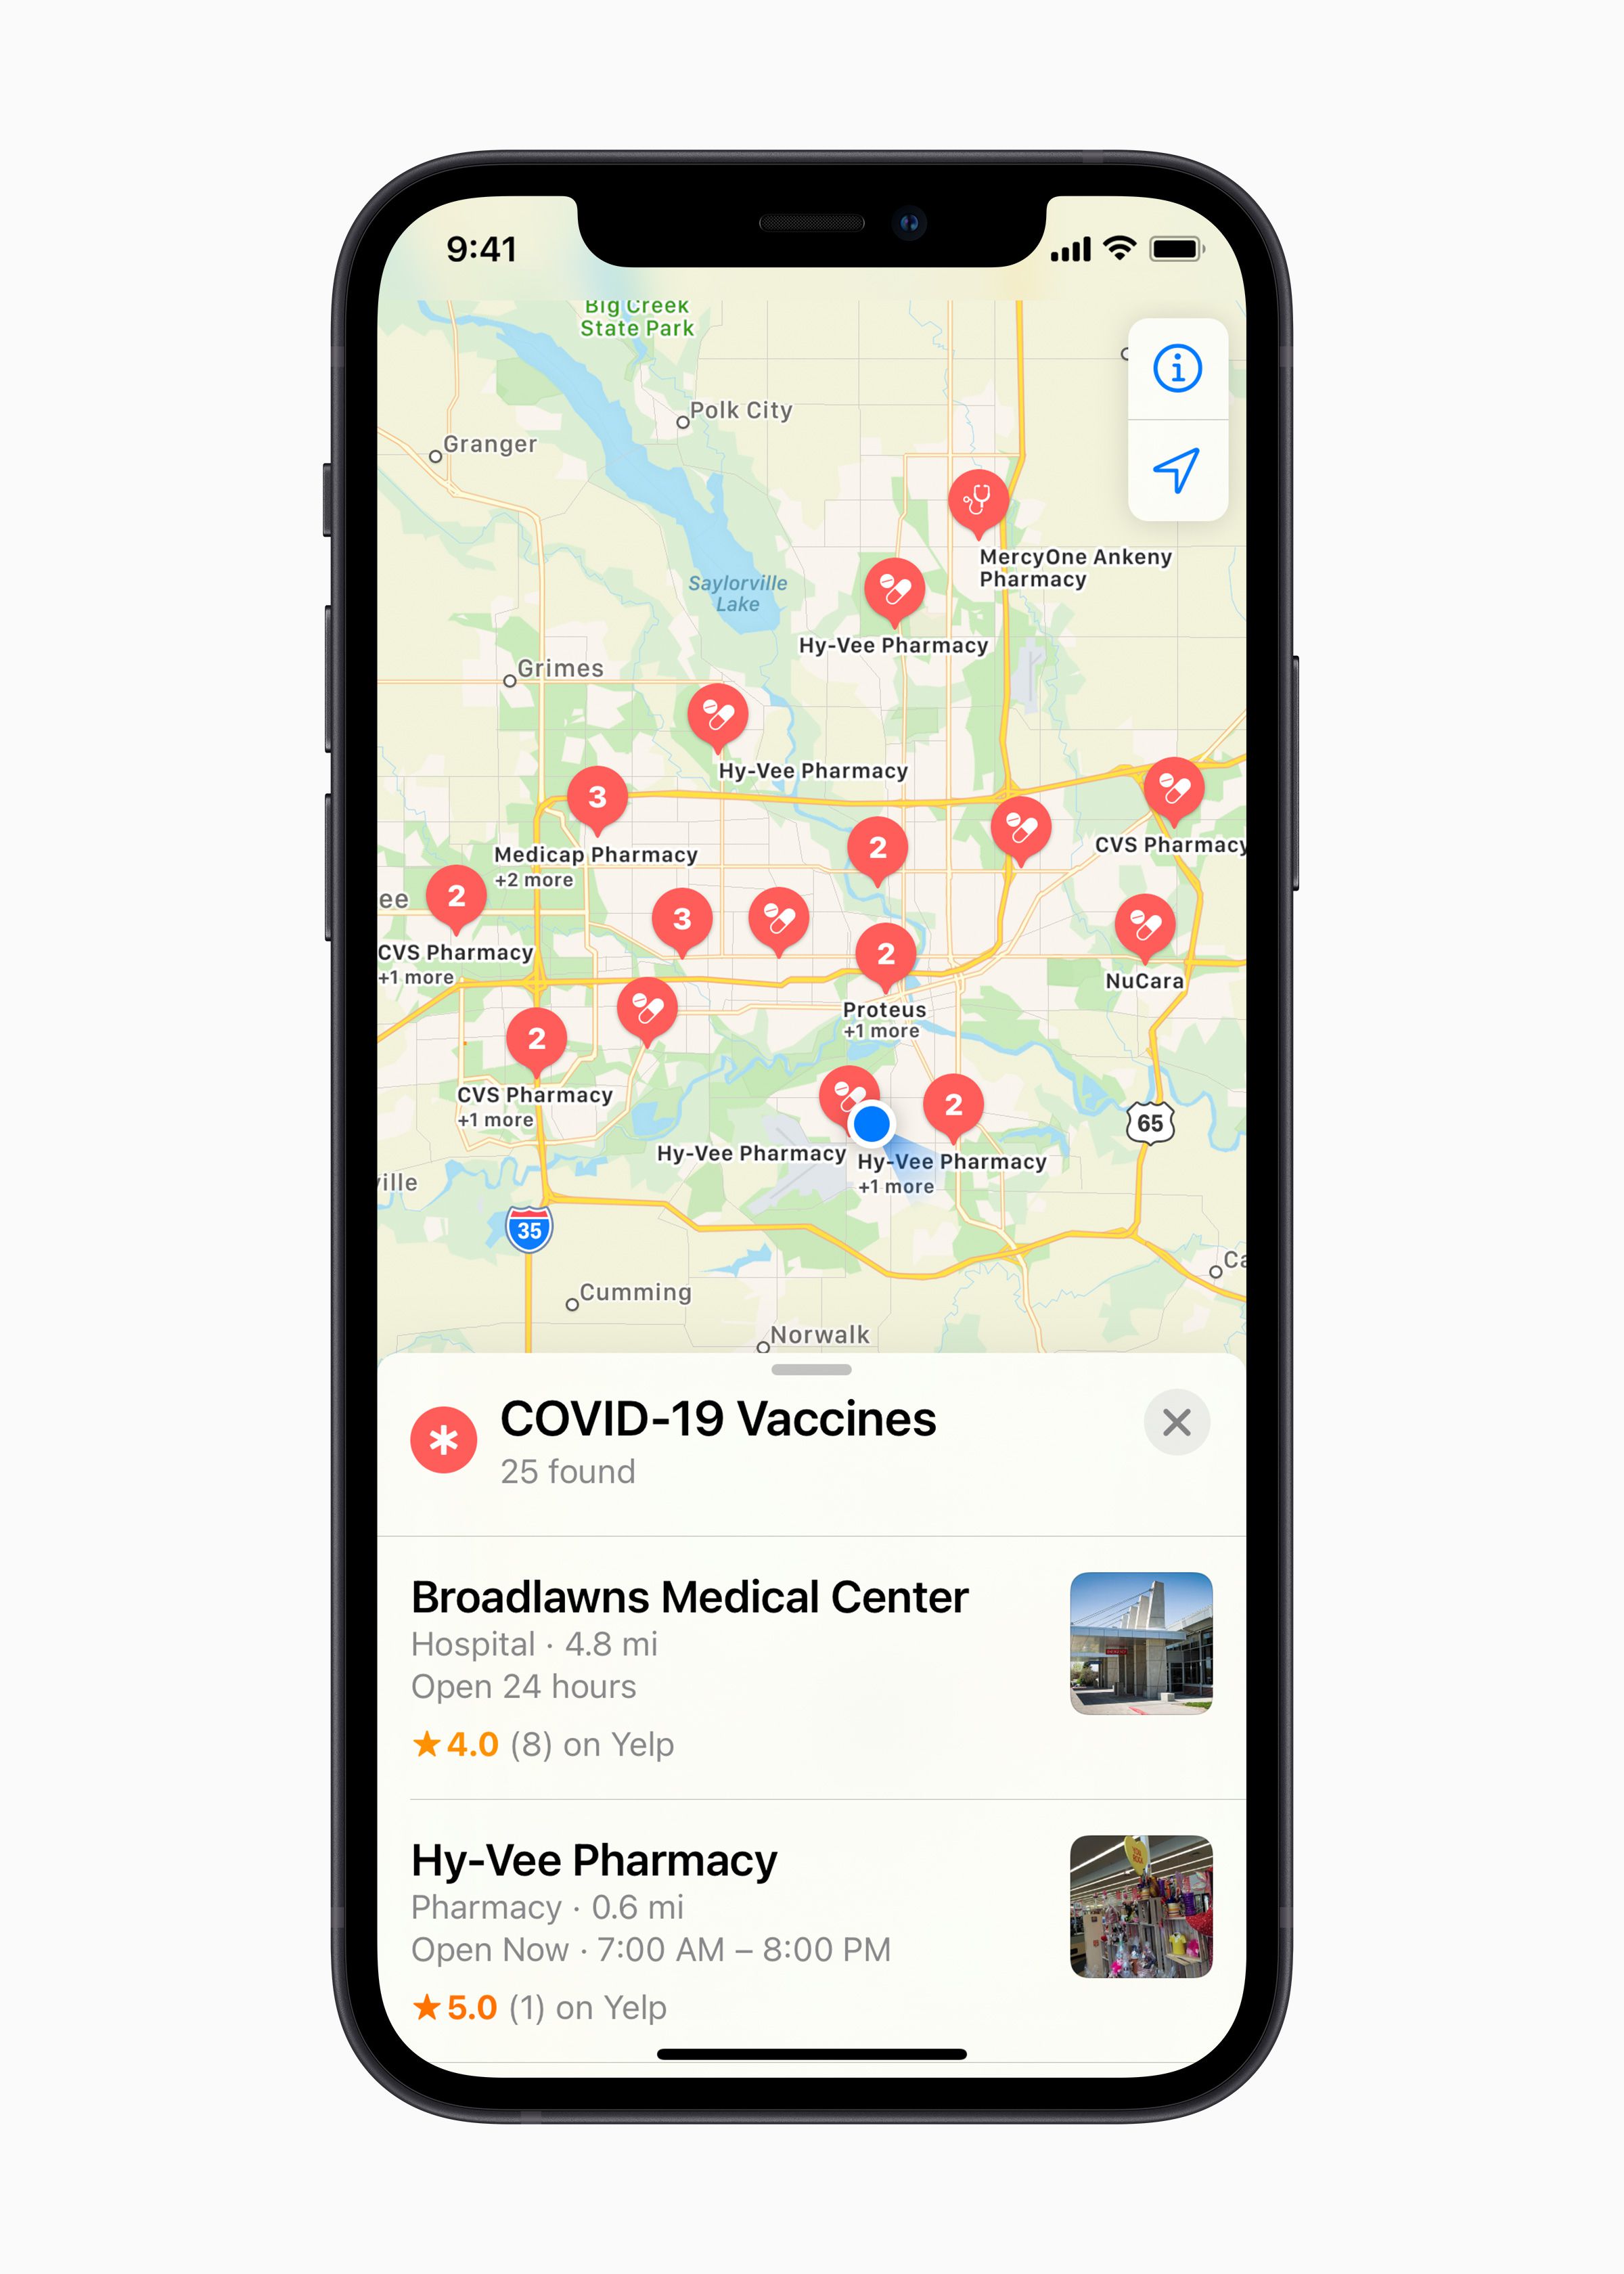 Image of a phone showing Apple Maps with locations marked as COVID-19 vaccine sites.